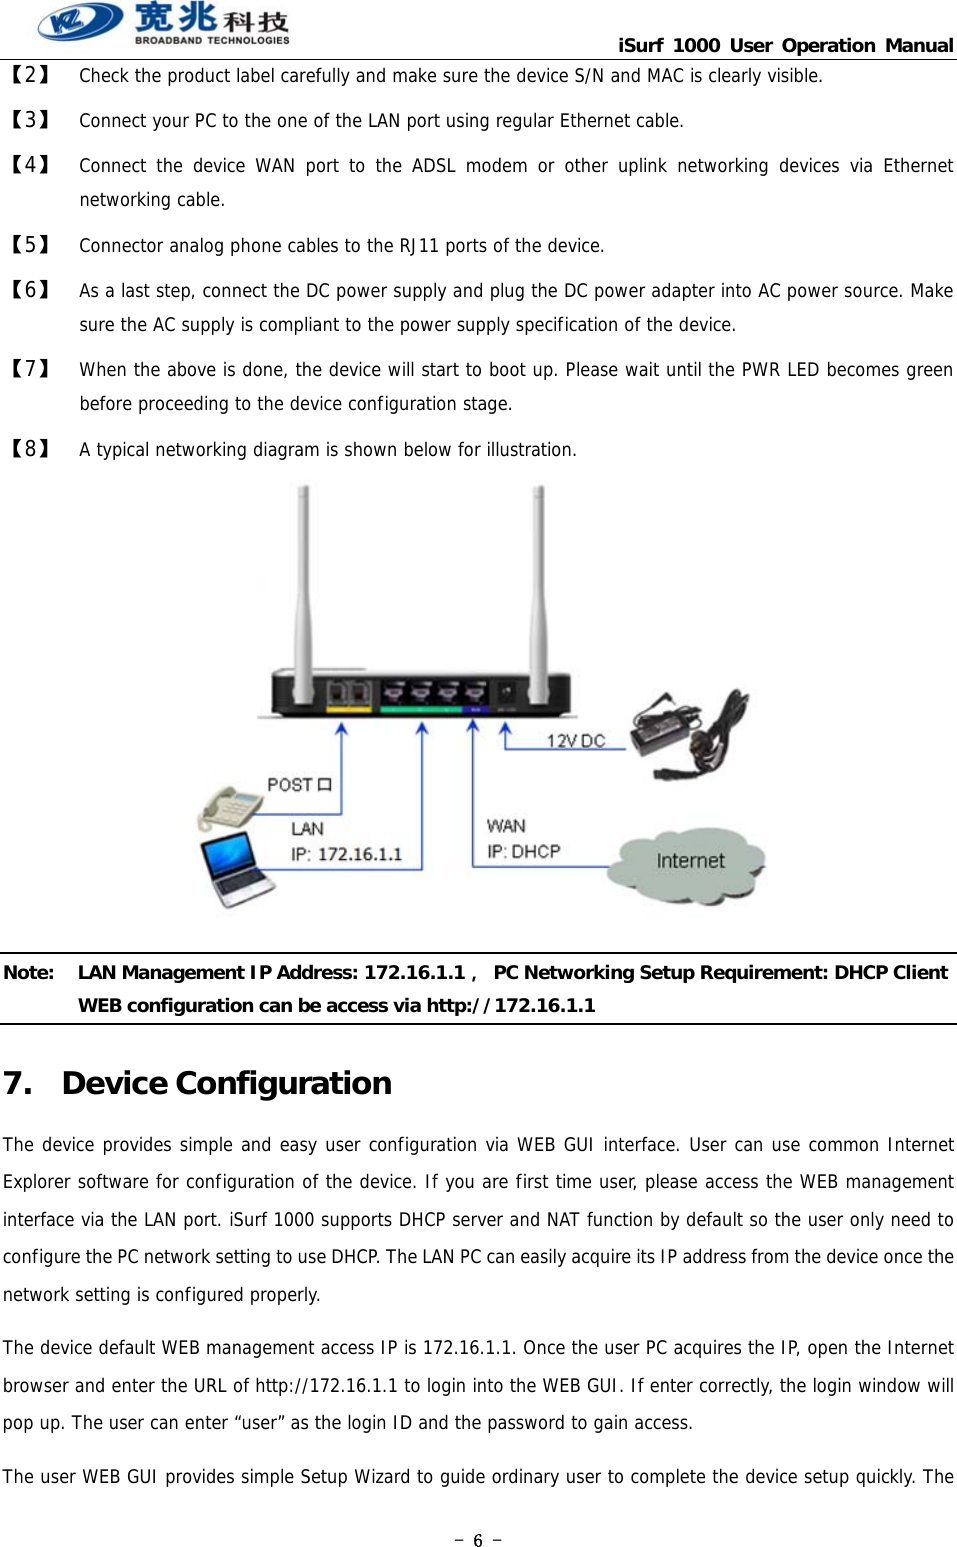                                   iSurf 1000 User Operation Manual - 6 - 【2】  Check the product label carefully and make sure the device S/N and MAC is clearly visible.  【3】  Connect your PC to the one of the LAN port using regular Ethernet cable.  【4】  Connect the device WAN port to the ADSL modem or other uplink networking devices via Ethernet networking cable.  【5】  Connector analog phone cables to the RJ11 ports of the device.   【6】  As a last step, connect the DC power supply and plug the DC power adapter into AC power source. Make sure the AC supply is compliant to the power supply specification of the device. 【7】  When the above is done, the device will start to boot up. Please wait until the PWR LED becomes green before proceeding to the device configuration stage.  【8】  A typical networking diagram is shown below for illustration.  Note:  LAN Management IP Address: 172.16.1.1，  PC Networking Setup Requirement: DHCP Client WEB configuration can be access via http://172.16.1.1 7. Device Configuration The device provides simple and easy user configuration via WEB GUI interface. User can use common Internet Explorer software for configuration of the device. If you are first time user, please access the WEB management interface via the LAN port. iSurf 1000 supports DHCP server and NAT function by default so the user only need to configure the PC network setting to use DHCP. The LAN PC can easily acquire its IP address from the device once the network setting is configured properly.   The device default WEB management access IP is 172.16.1.1. Once the user PC acquires the IP, open the Internet browser and enter the URL of http://172.16.1.1 to login into the WEB GUI. If enter correctly, the login window will pop up. The user can enter “user” as the login ID and the password to gain access. The user WEB GUI provides simple Setup Wizard to guide ordinary user to complete the device setup quickly. The 